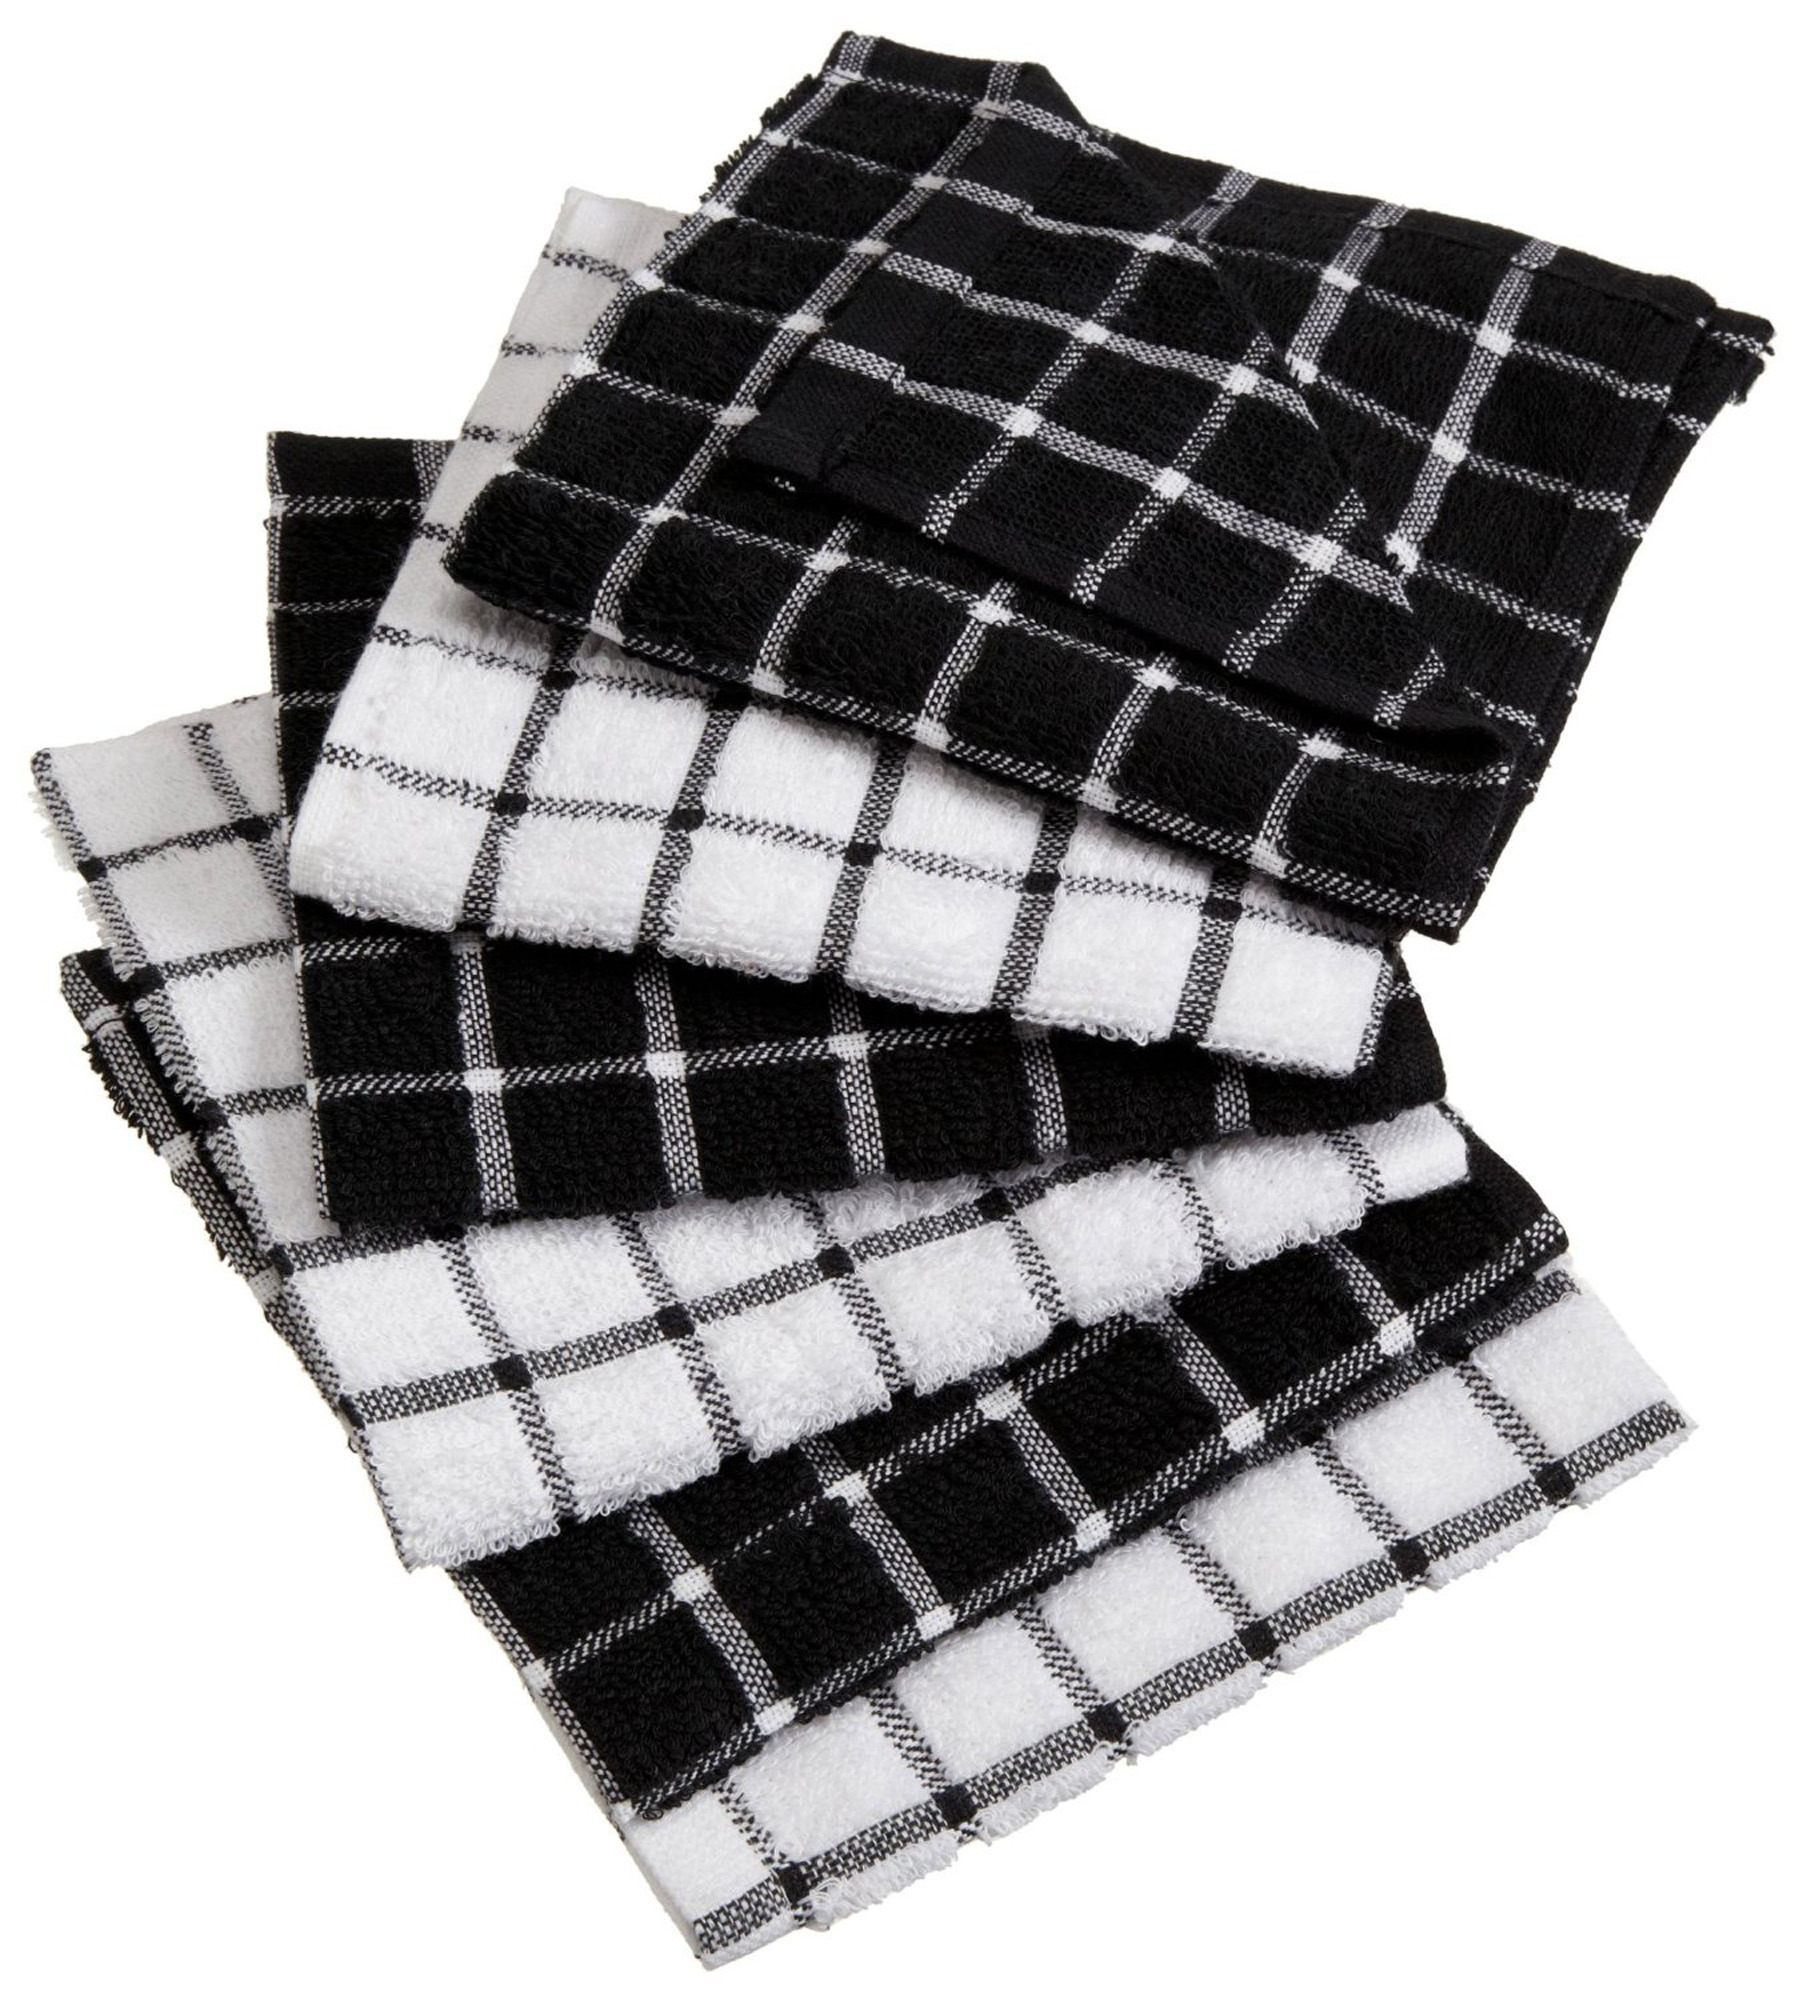 Contemporary Home Living Set of 6 Black and White Square Absorbent Dishcloth 12"